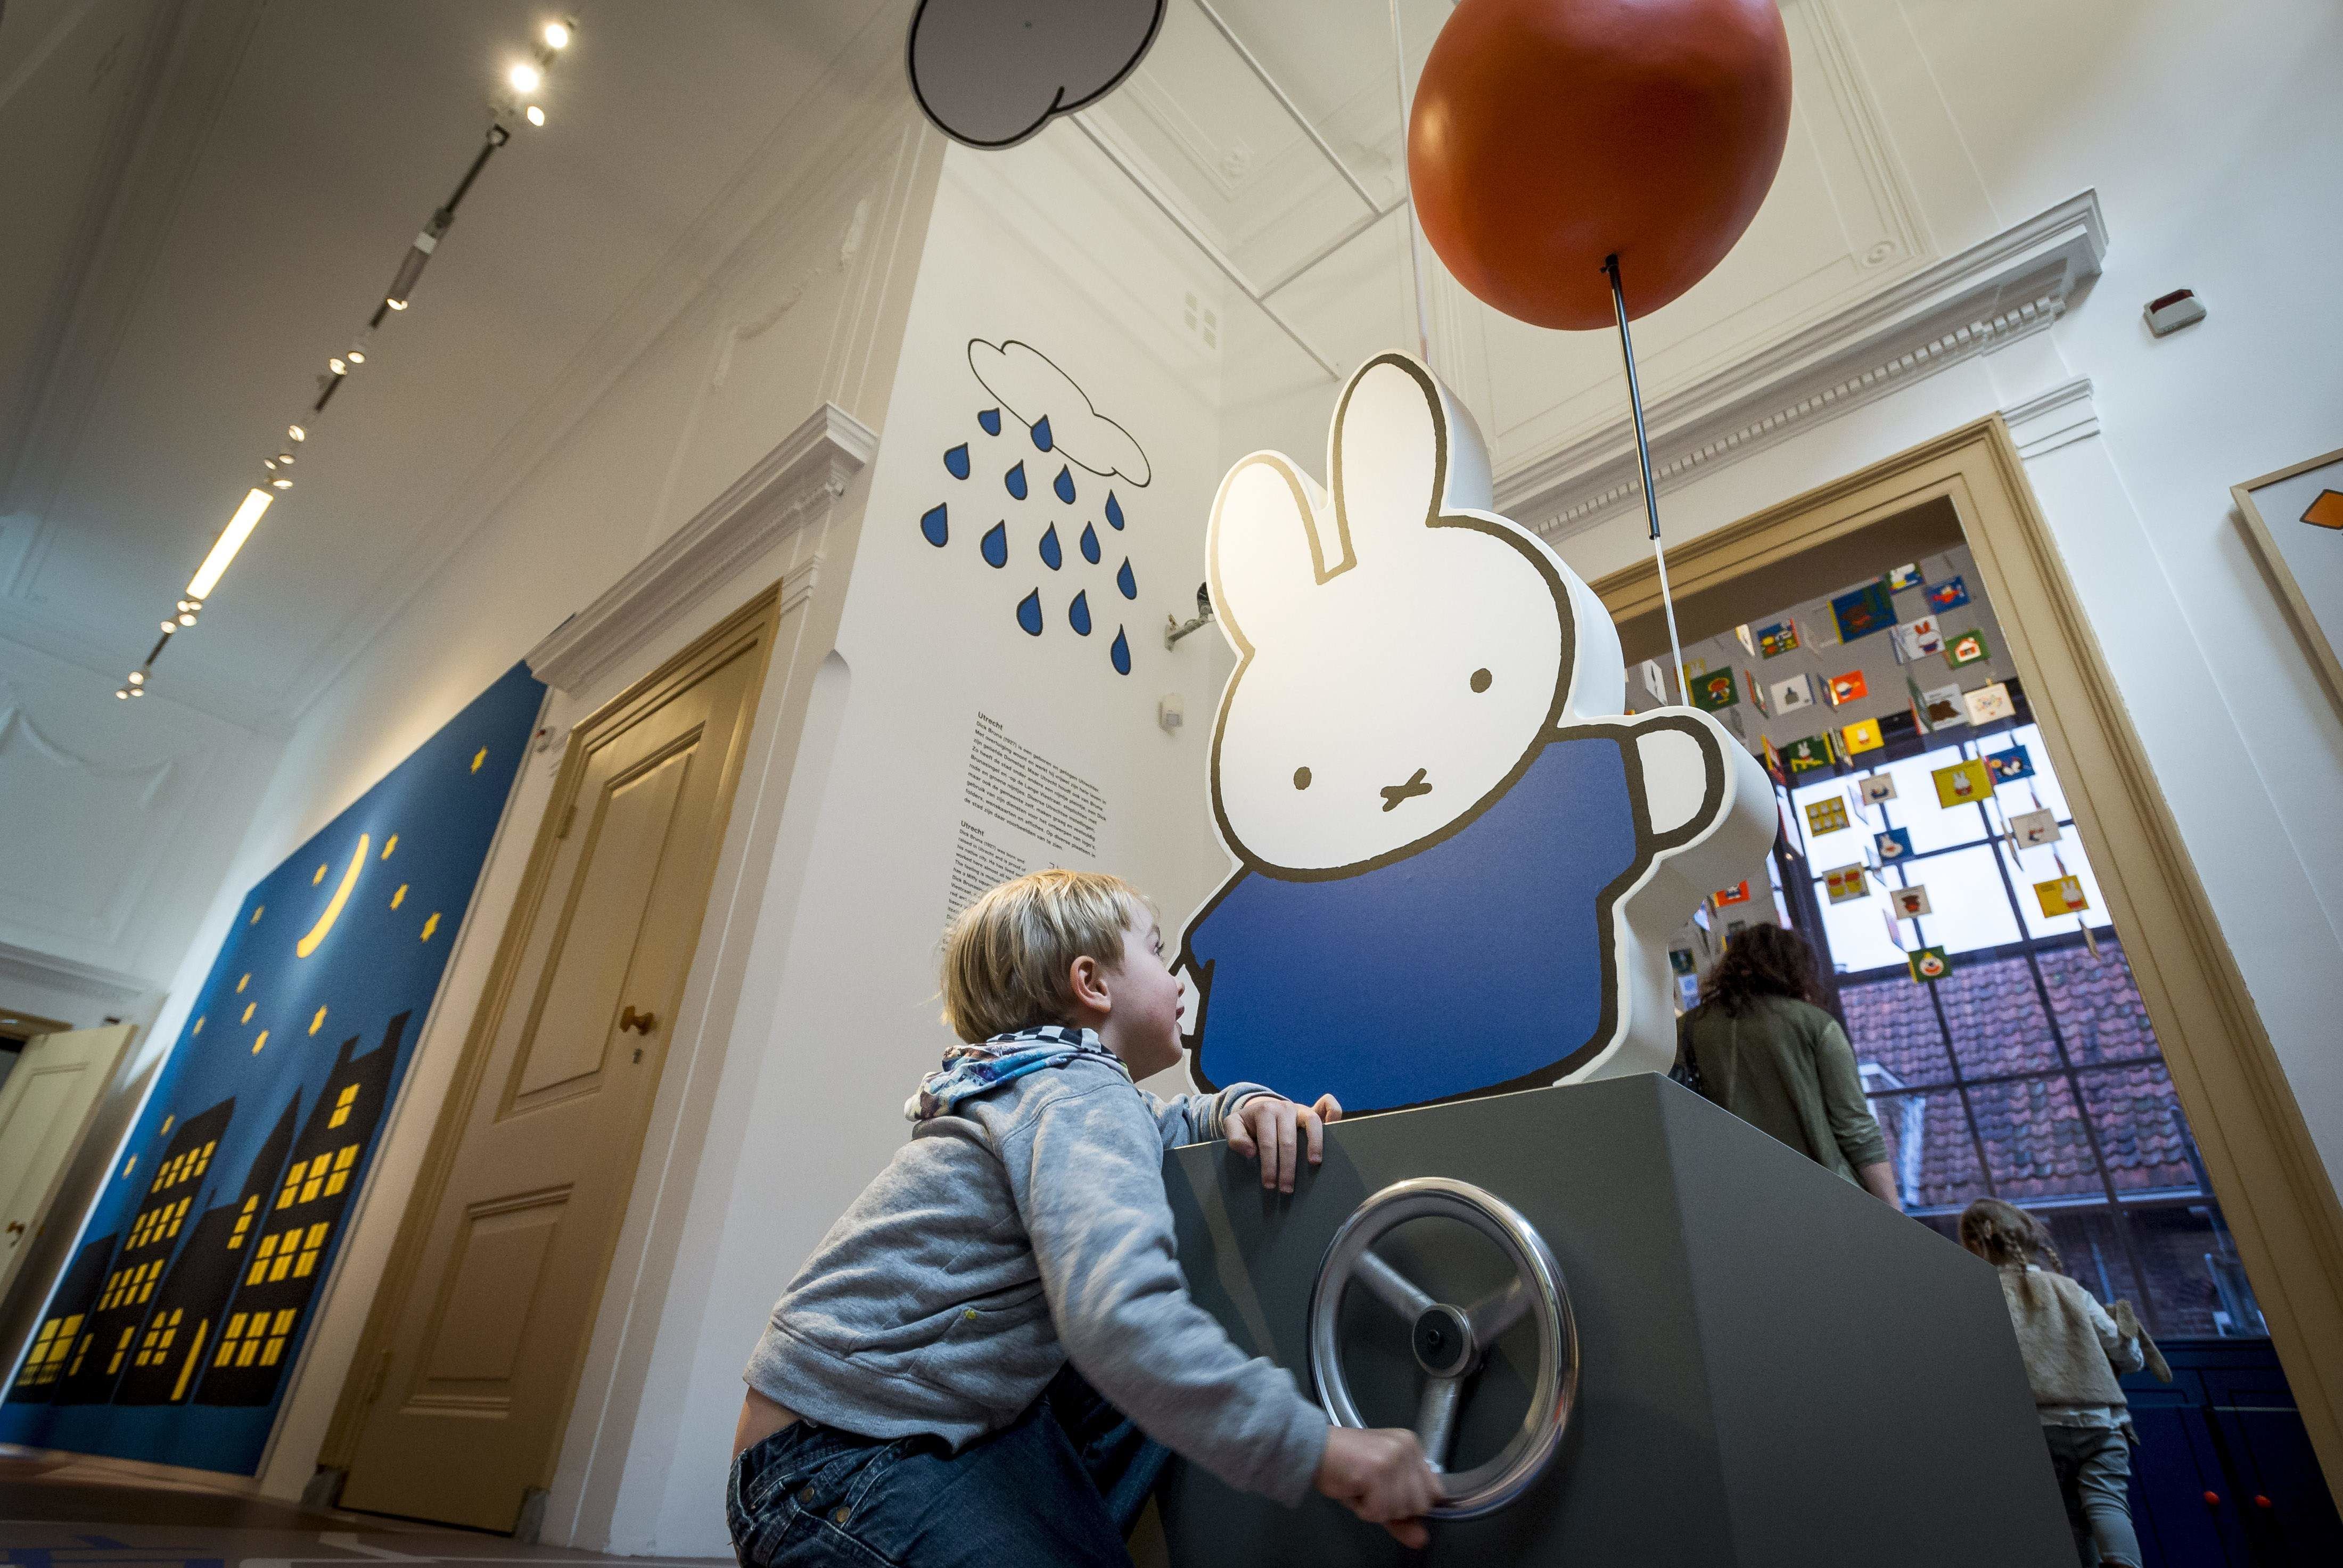 Children play during the official reopening of the 'Nijntje Museum' (Miffy Museum) in Utrecht on February 5, 2016. Miffy is a small female rabbit character created by Dutch author and illustrator Dick Bruna. The museum has replaced the closed Dick Bruna House. / AFP / ANP / Lex van Lieshout / RESTRICTED TO EDITORIAL USE - MANDATORY MENTION OF THE ARTIST UPON PUBLICATION - TO ILLUSTRATE THE EVENT AS SPECIFIED IN THE CAPTION